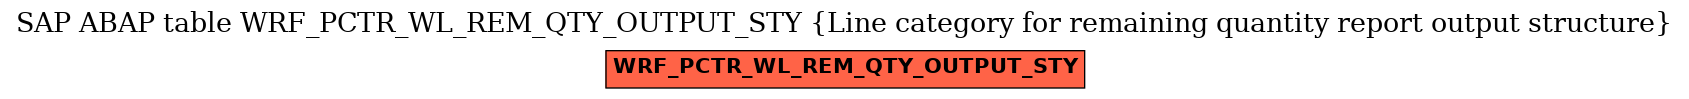 E-R Diagram for table WRF_PCTR_WL_REM_QTY_OUTPUT_STY (Line category for remaining quantity report output structure)